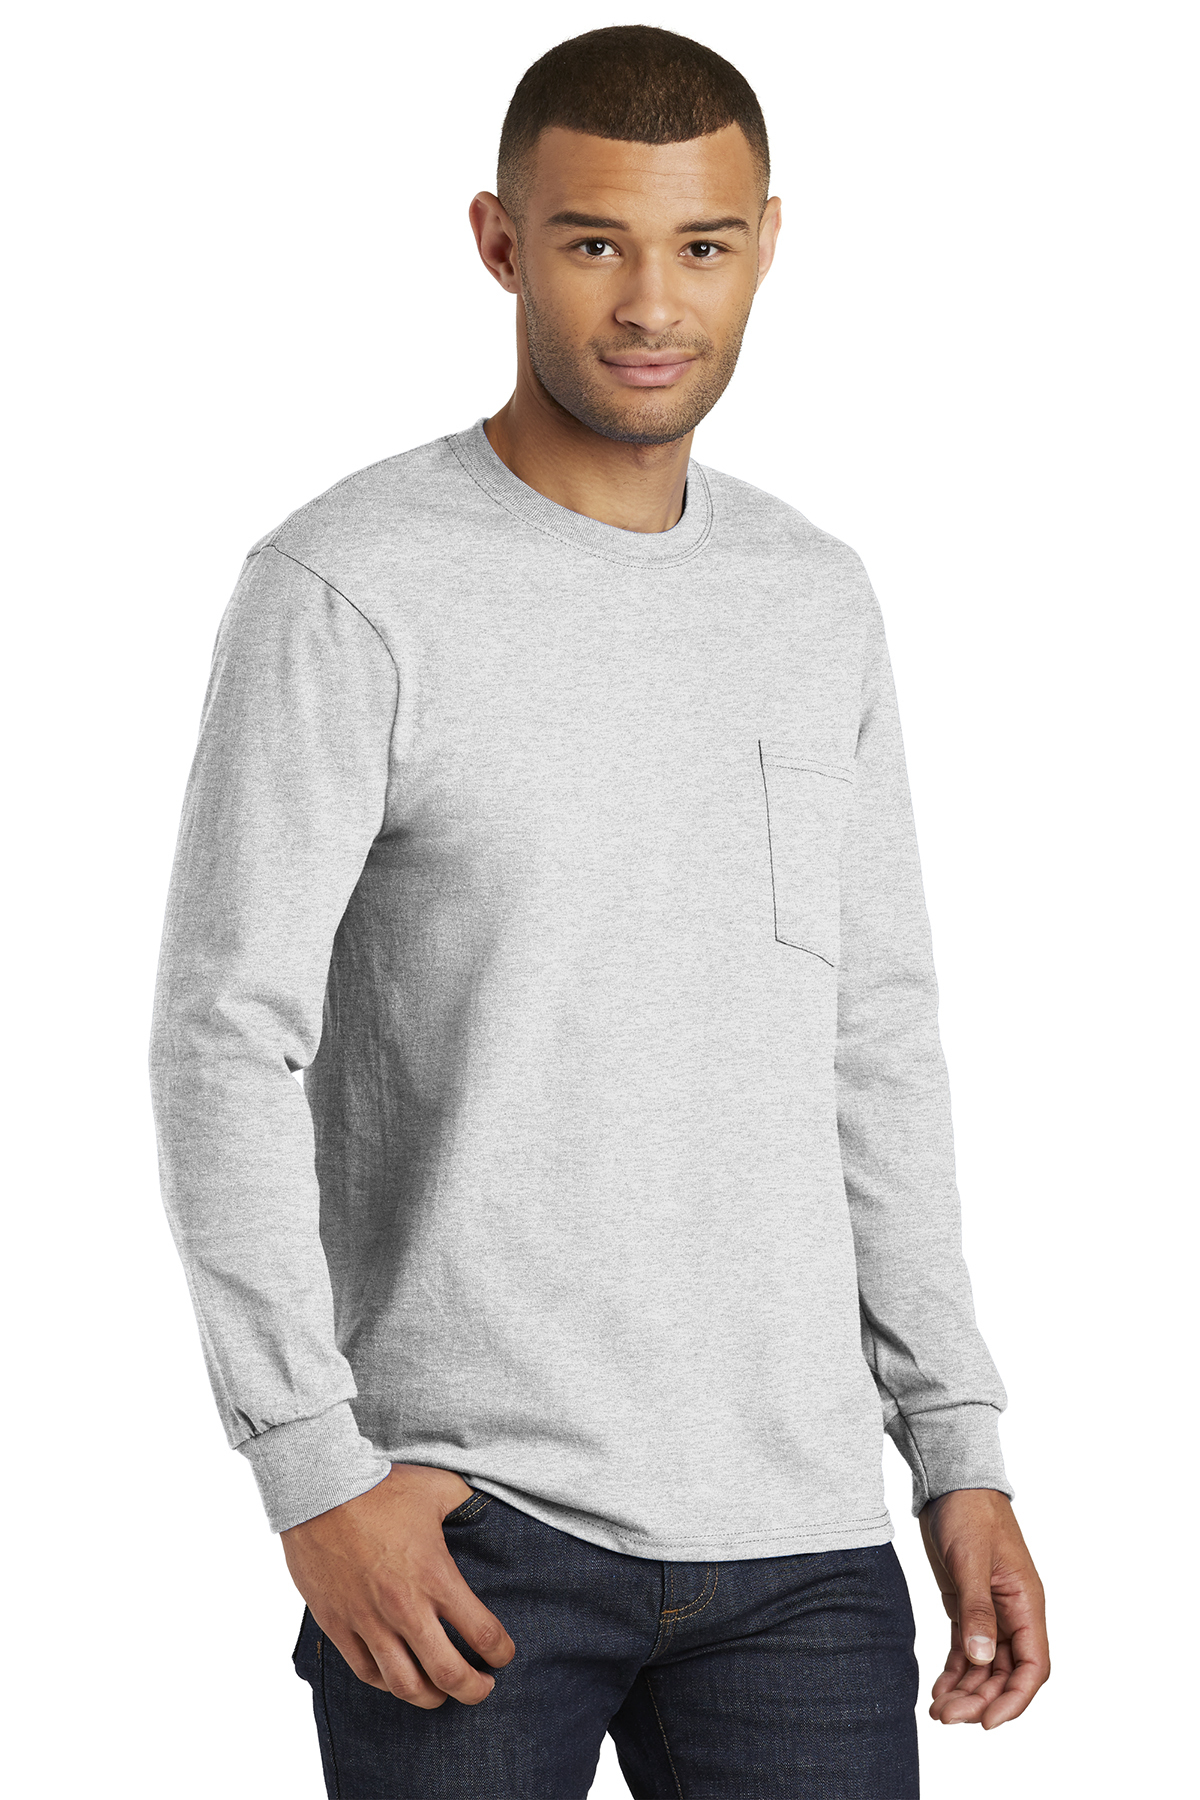 Port & Company Tall Long Sleeve Essential Pocket Tee | Product ...